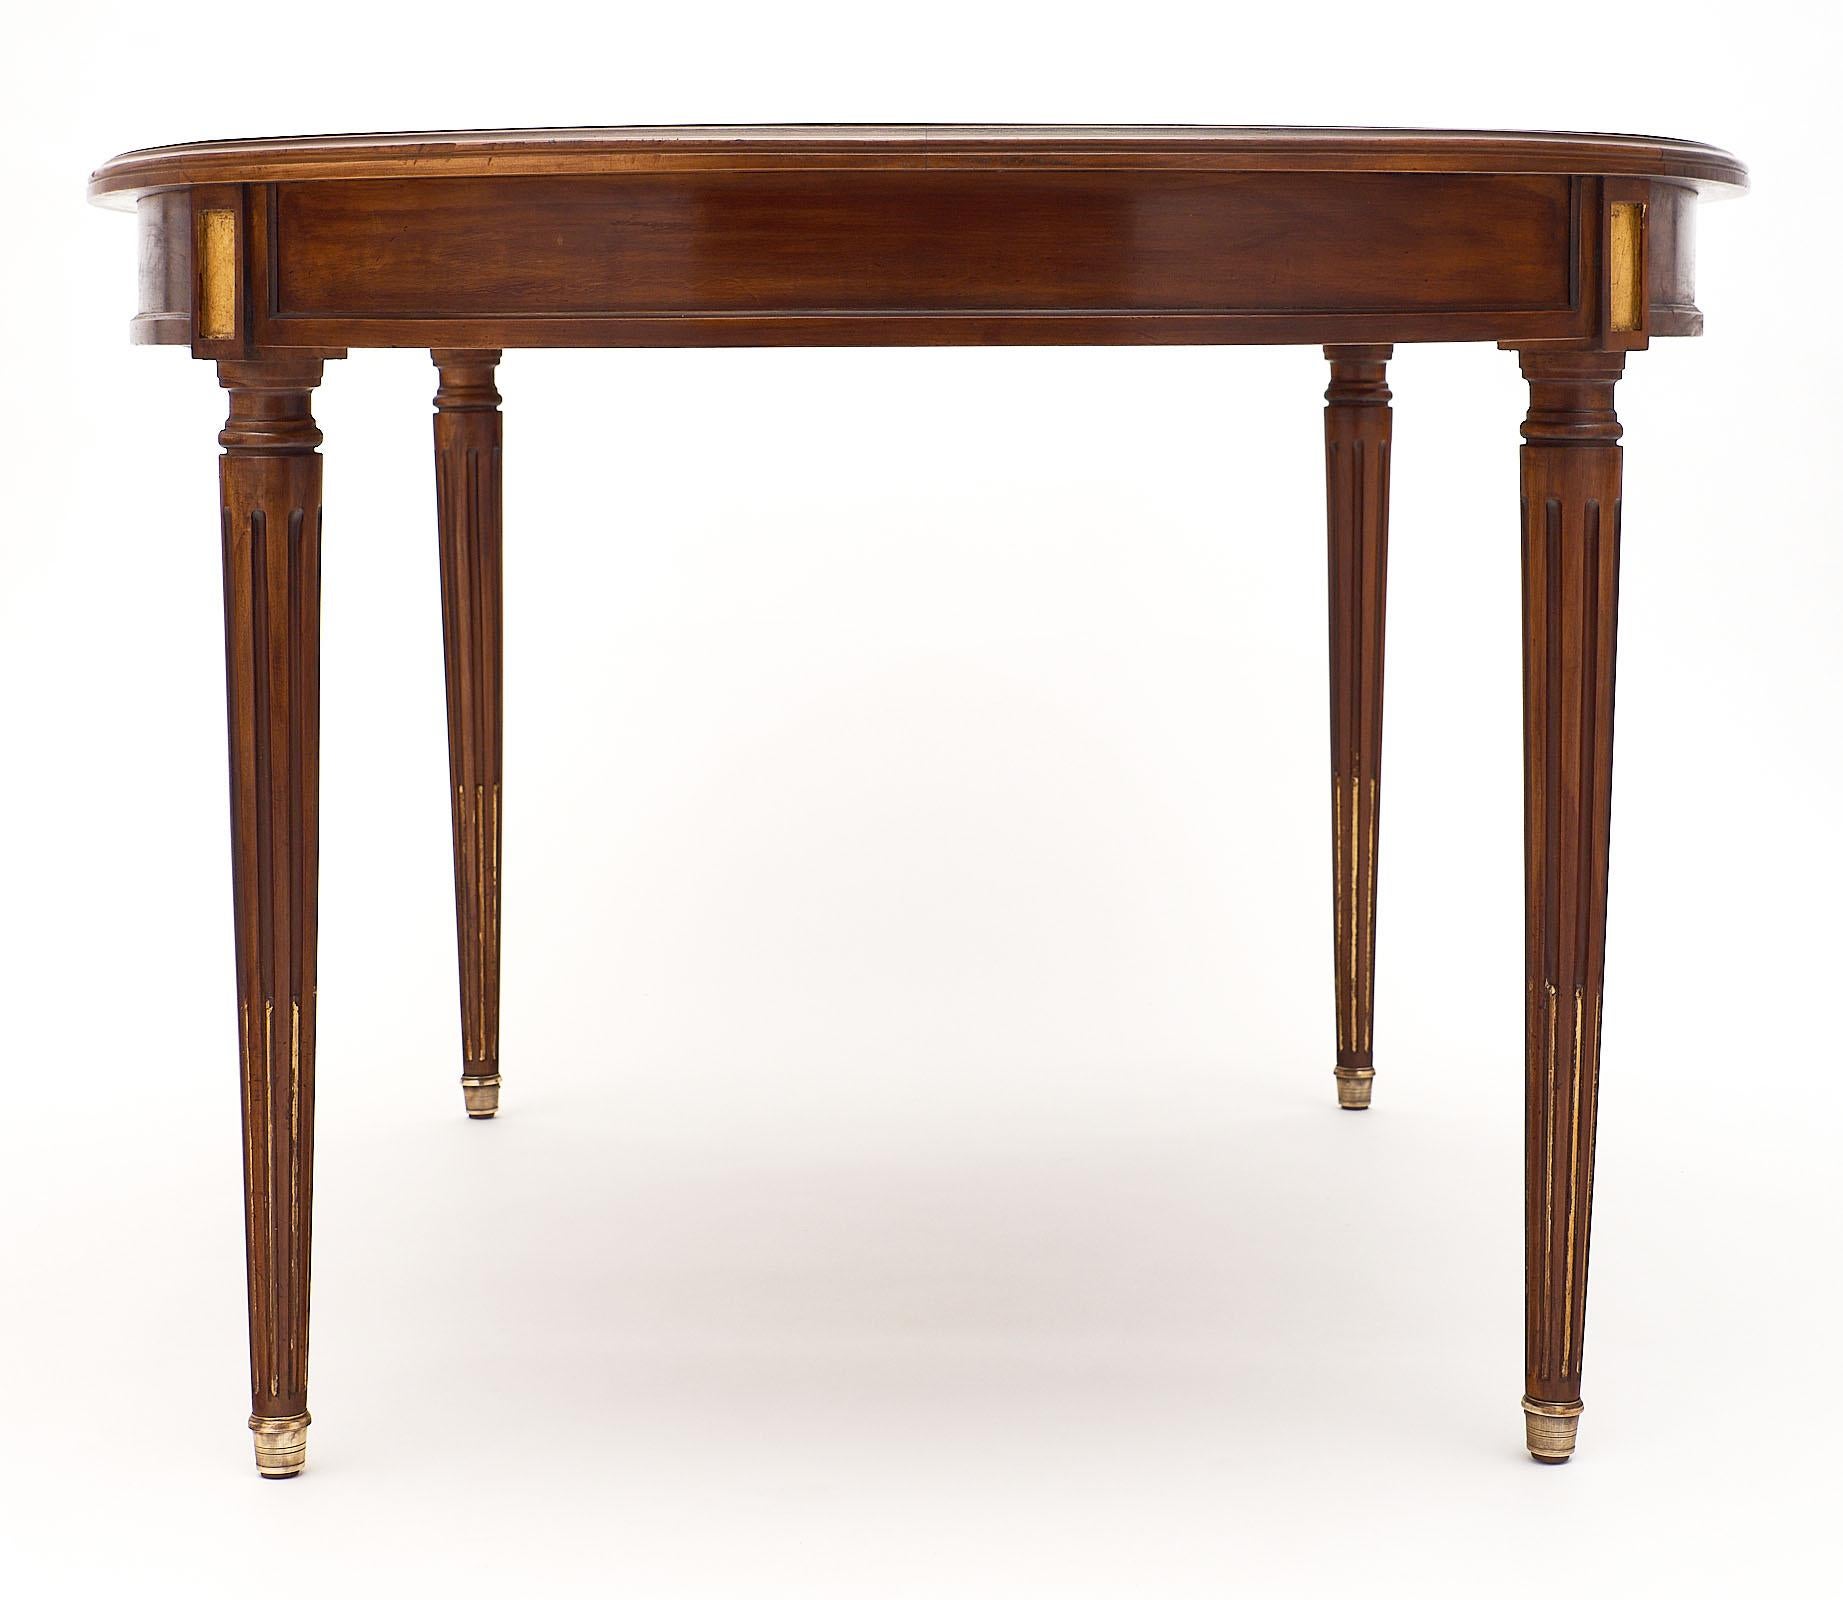 Early 20th Century Mahogany Louis XVI Style Antique Dining Table